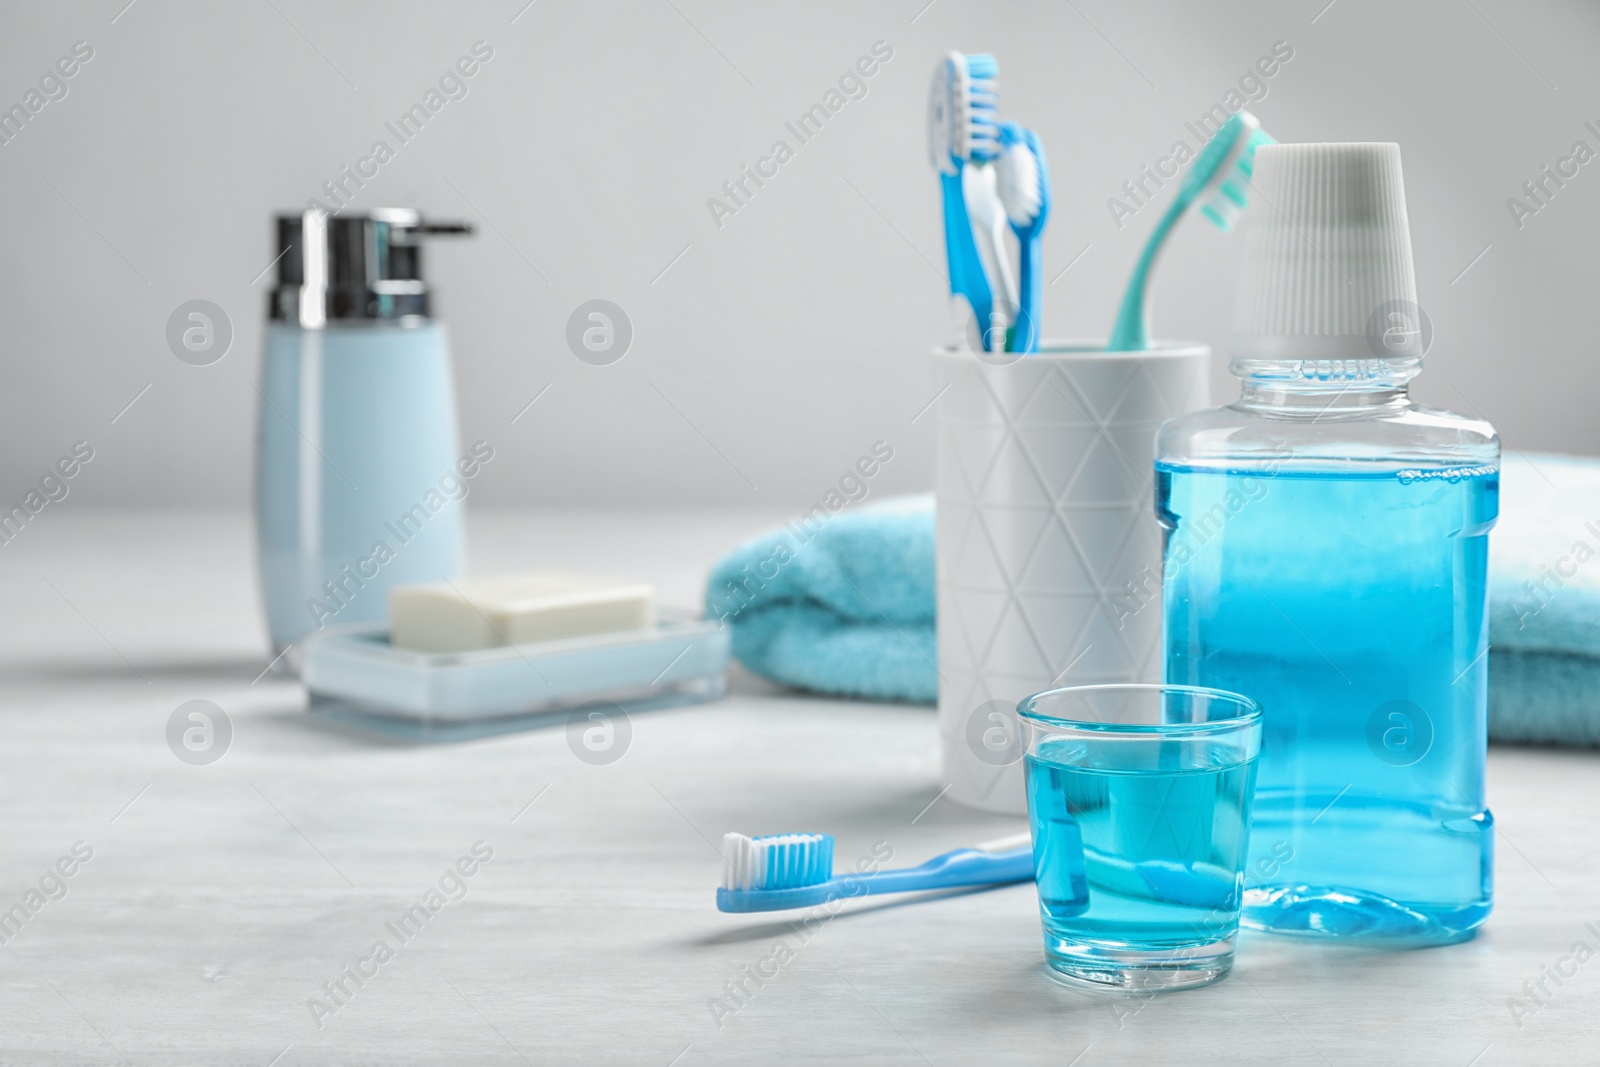 Photo of Set of oral care products on light table. Teeth hygiene